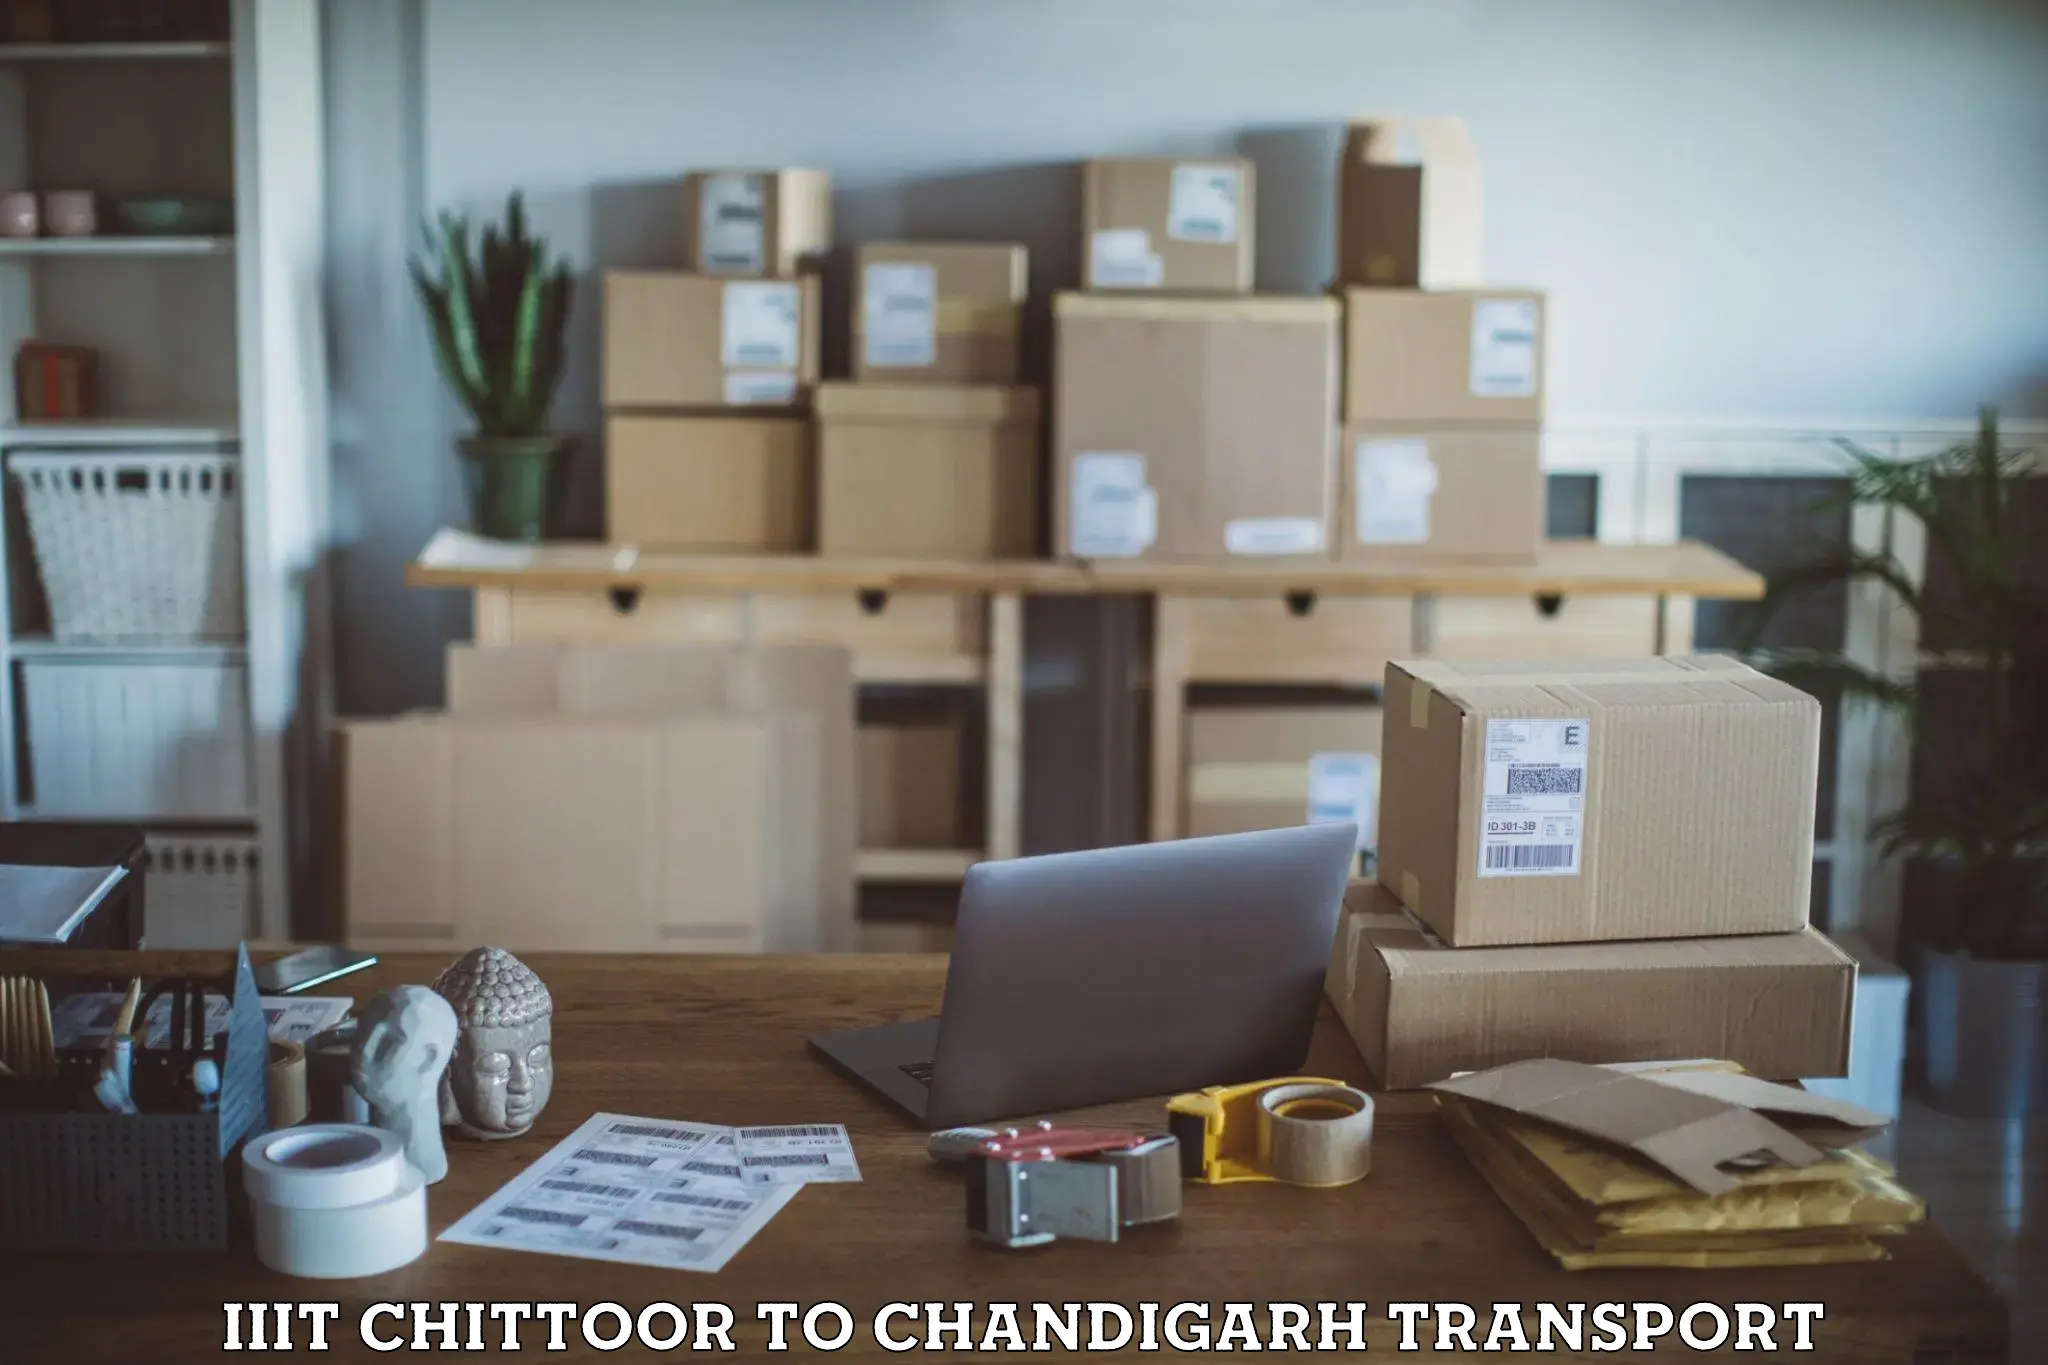 Daily parcel service transport IIIT Chittoor to Chandigarh